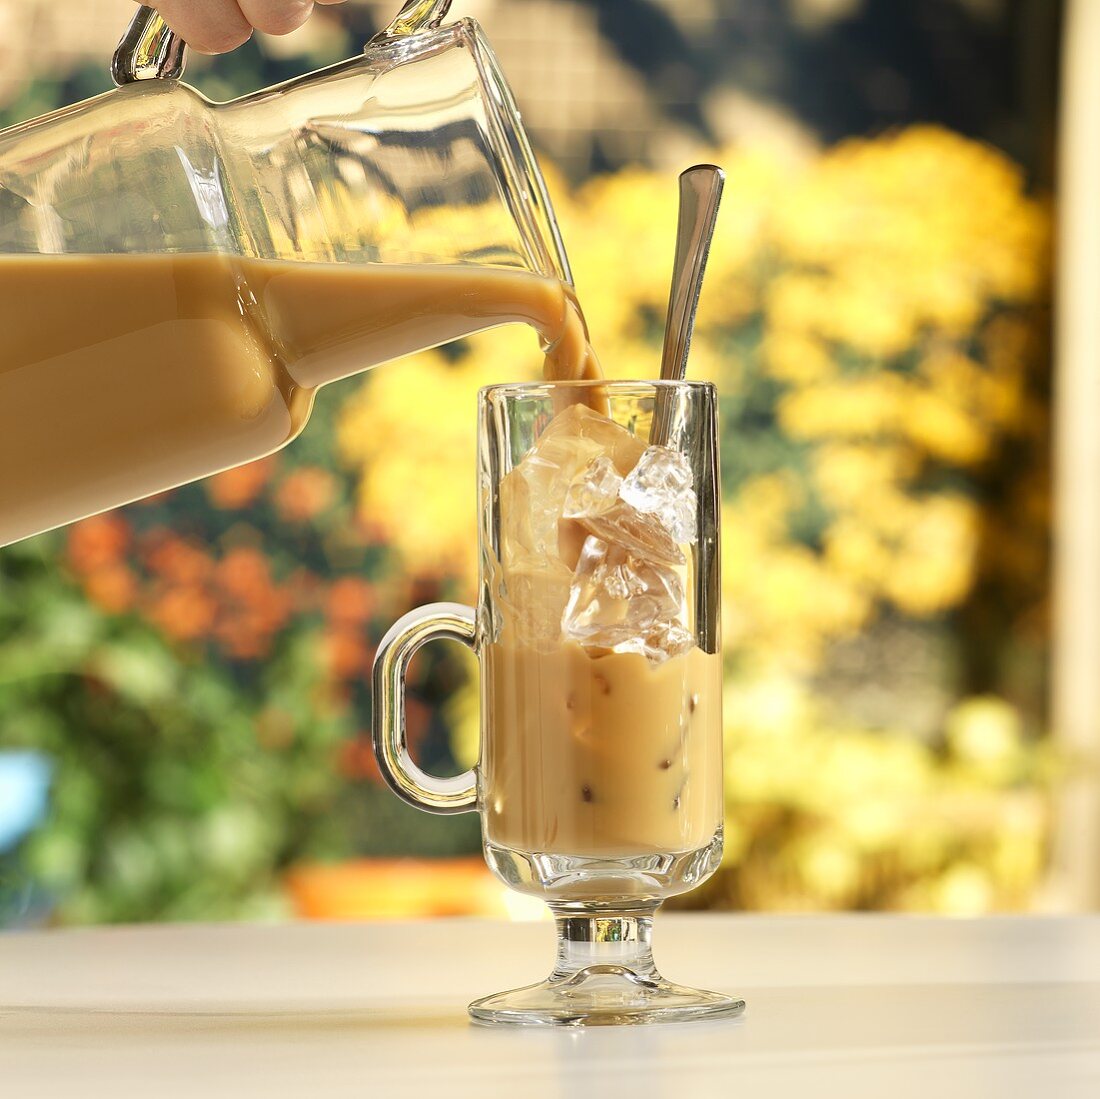 Ice Coffee Pouring into a Glass from Pitcher